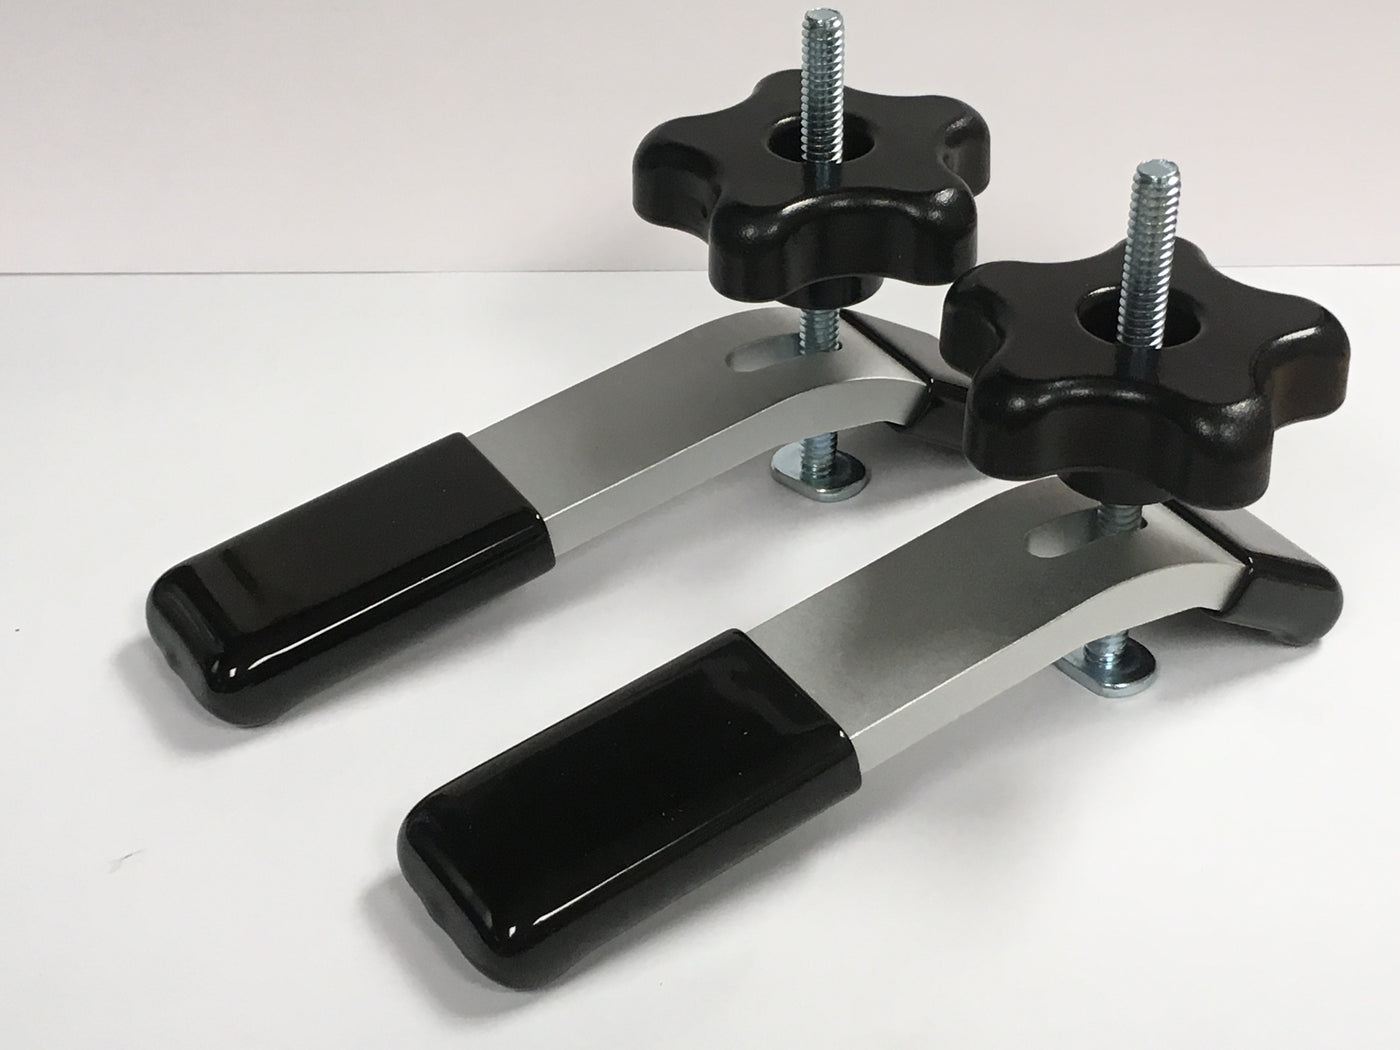 Cantilever Hold Down Clamps